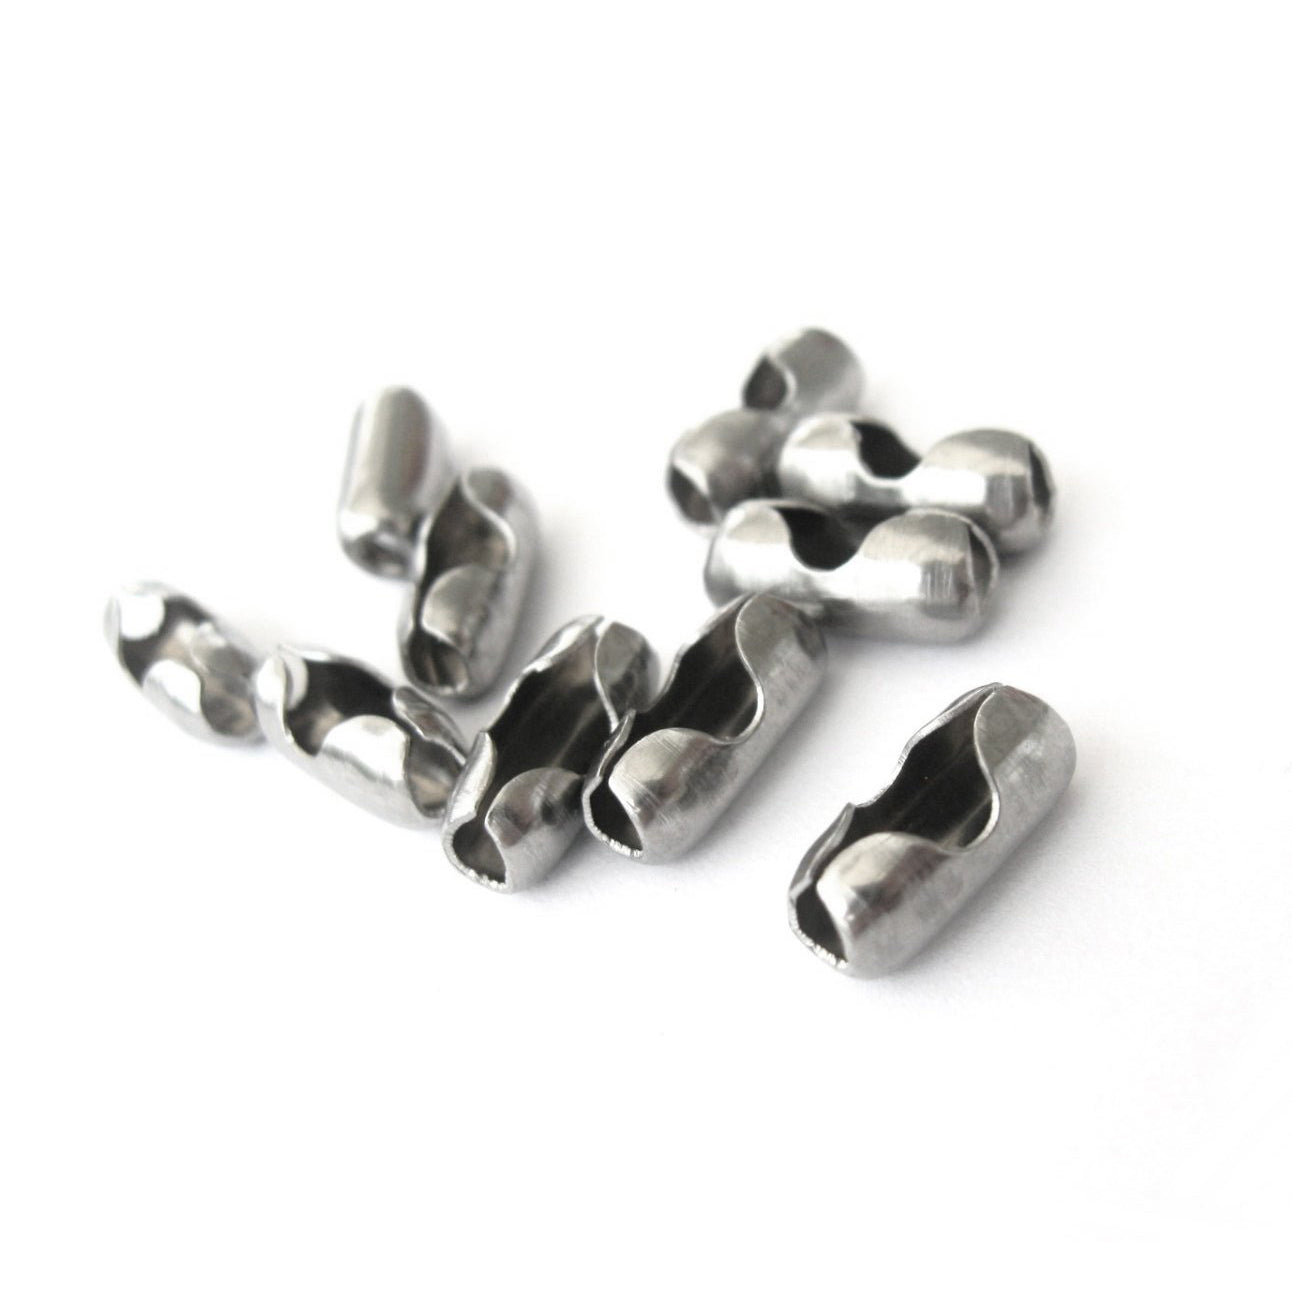 Ball Chain Connectors: Necklace Clasps Fit 2.4mm Metal Bead Balls Nickel  Finish 